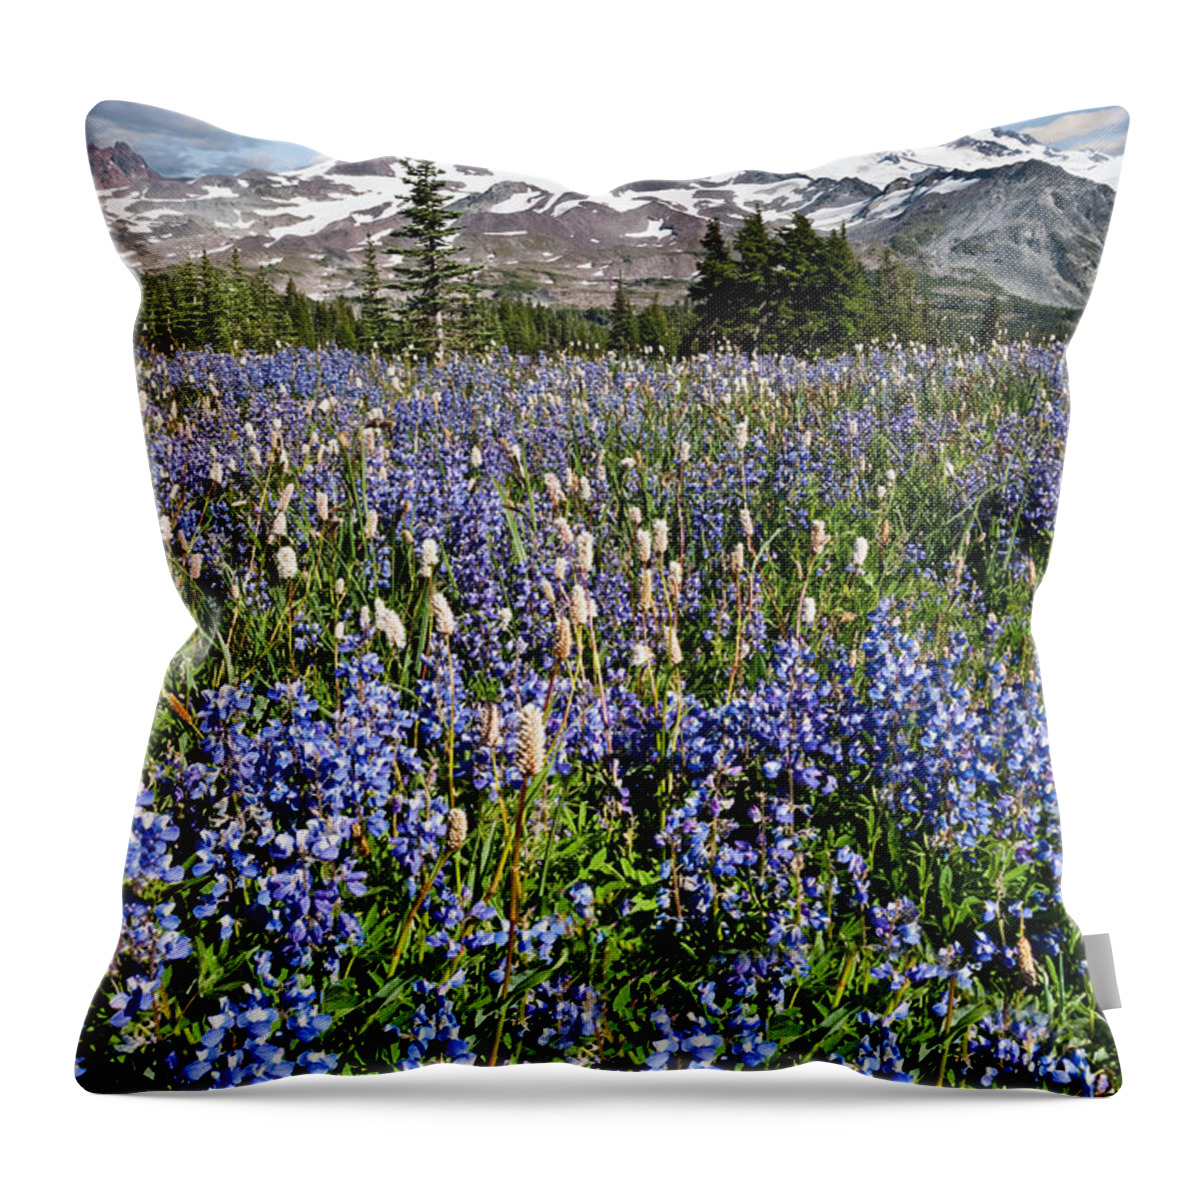 Alpine Throw Pillow featuring the photograph Meadow of Lupine Near Mount Rainier by Jeff Goulden